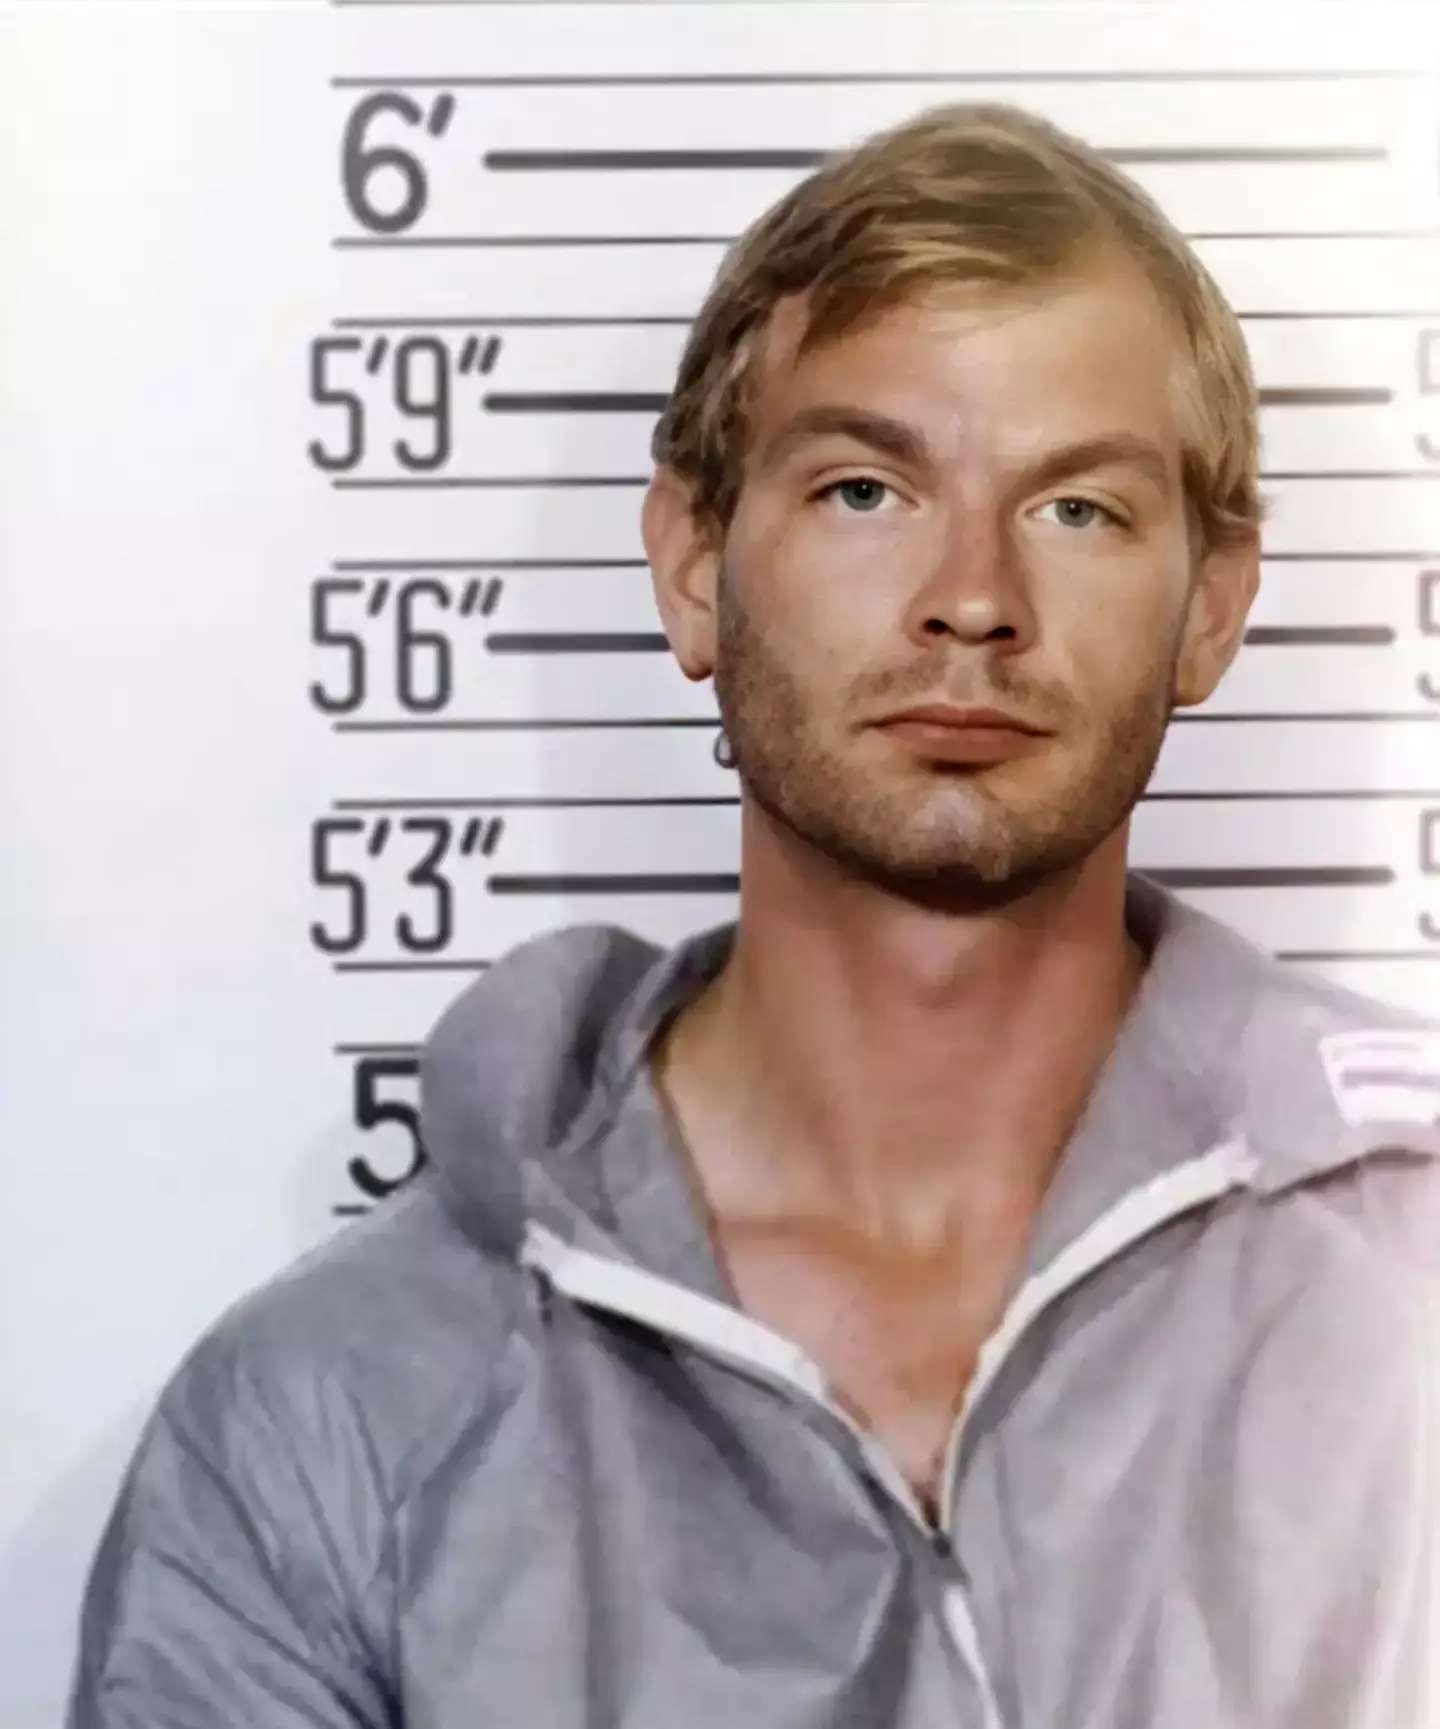 Jeffrey Dahmer killed 17 young men and boys before being arrested in 1991.